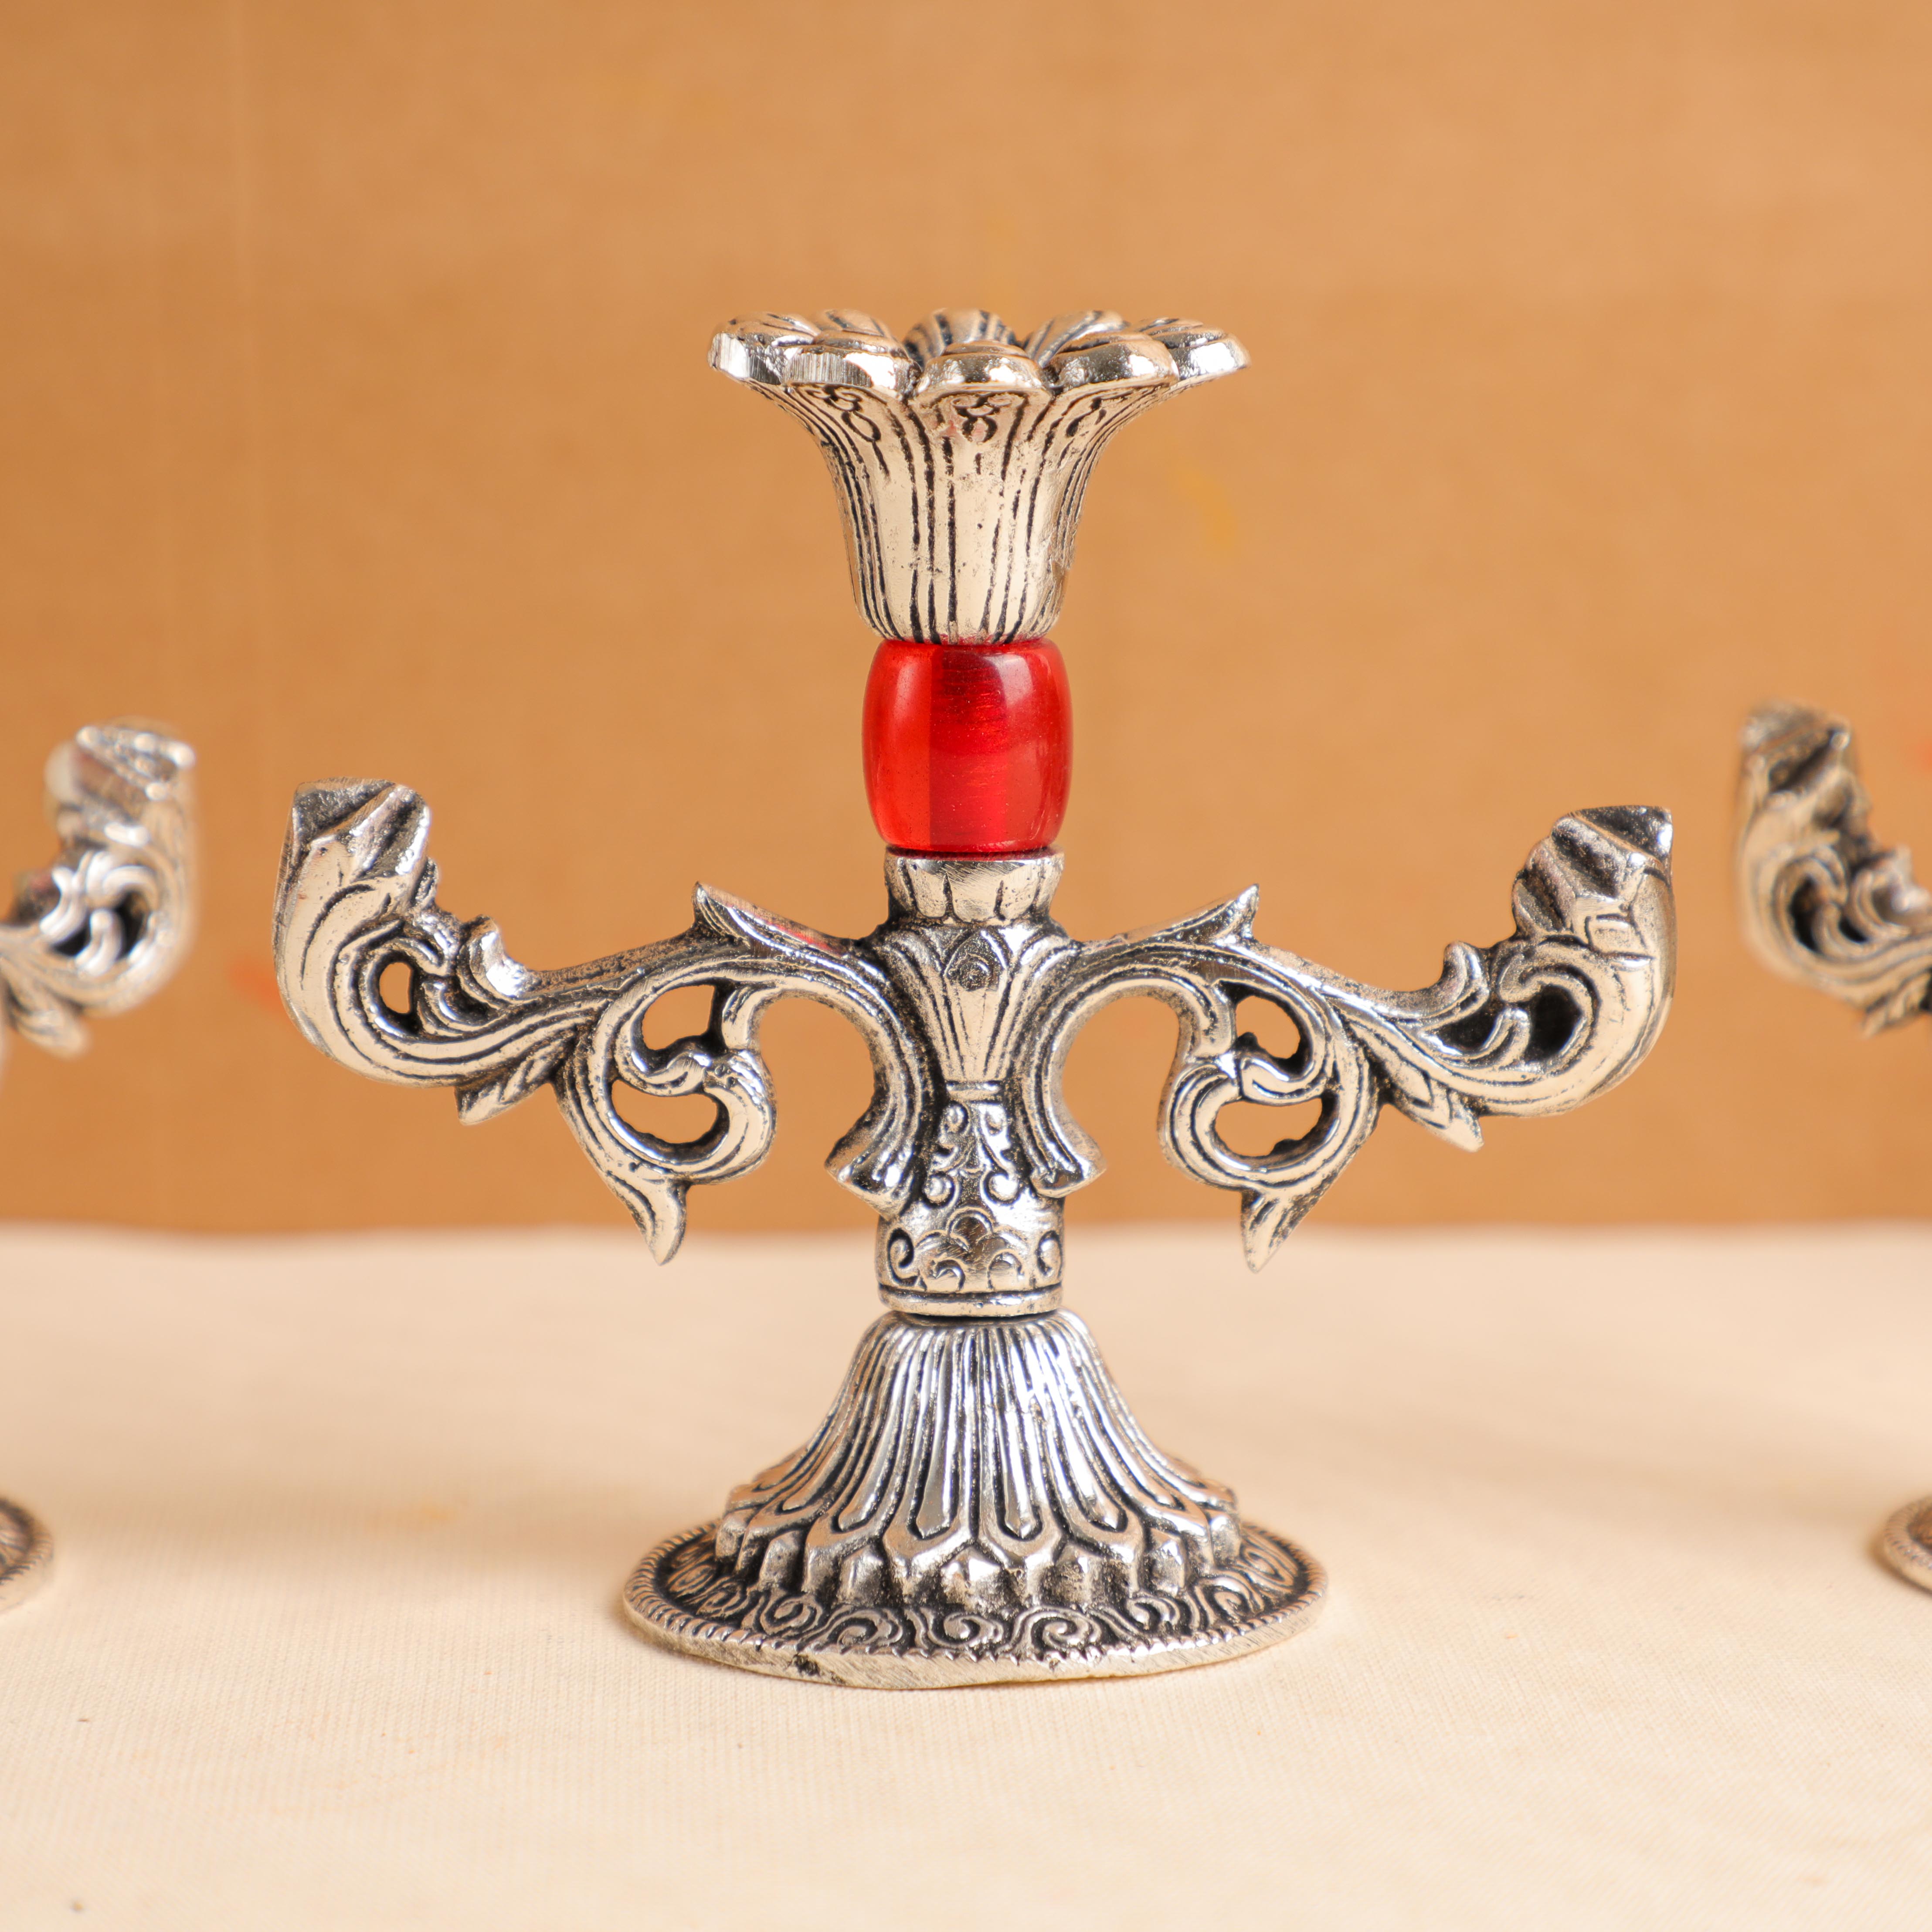 Candle Holder made with german silver